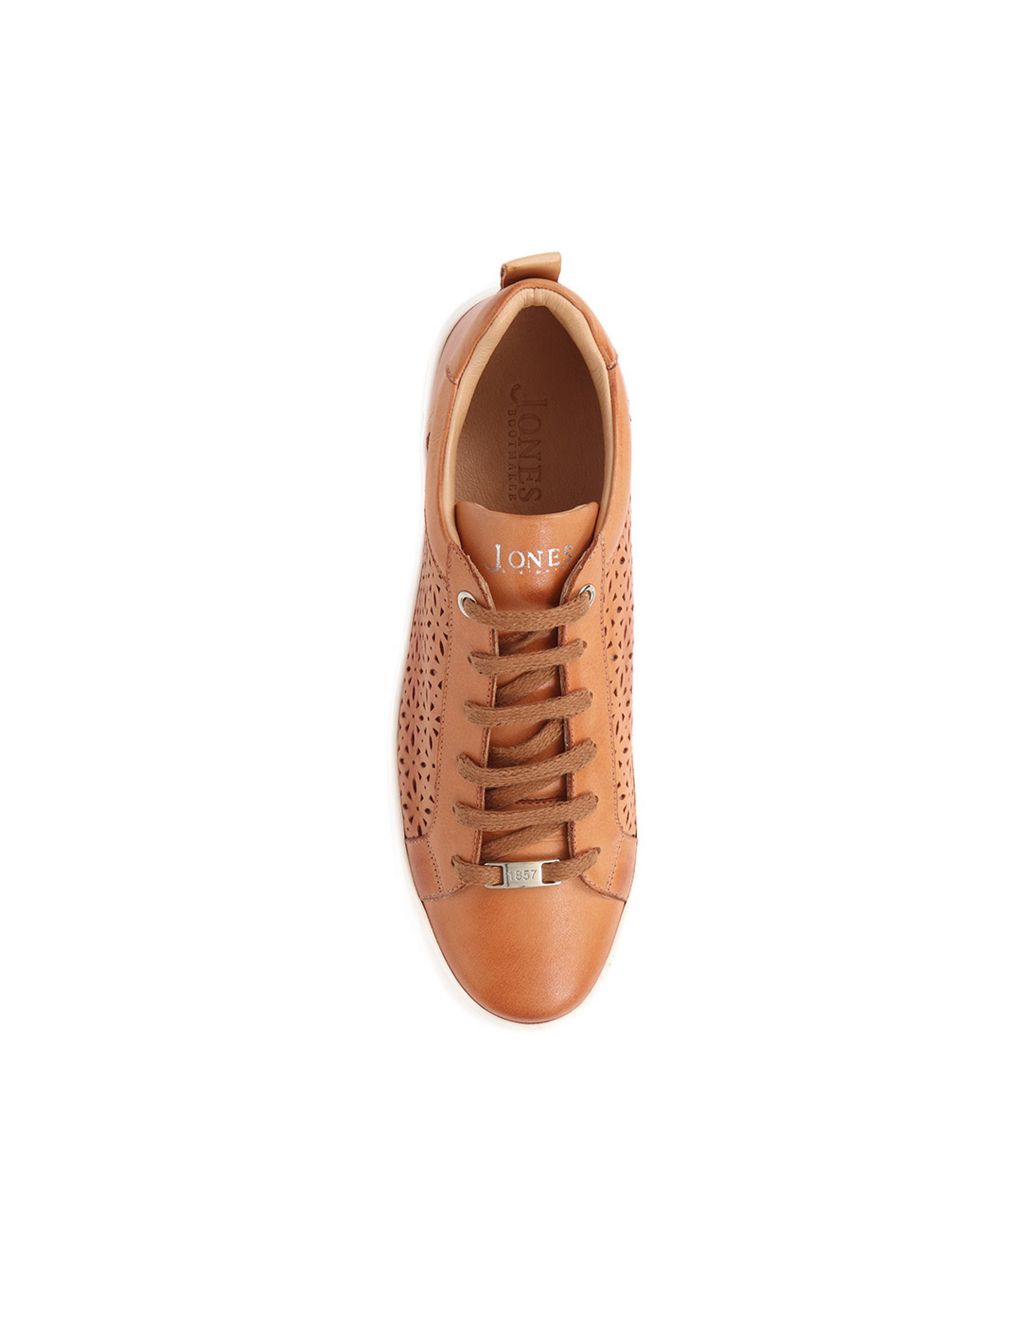 Leather Lace Up Perforated Flatform Trainers image 4